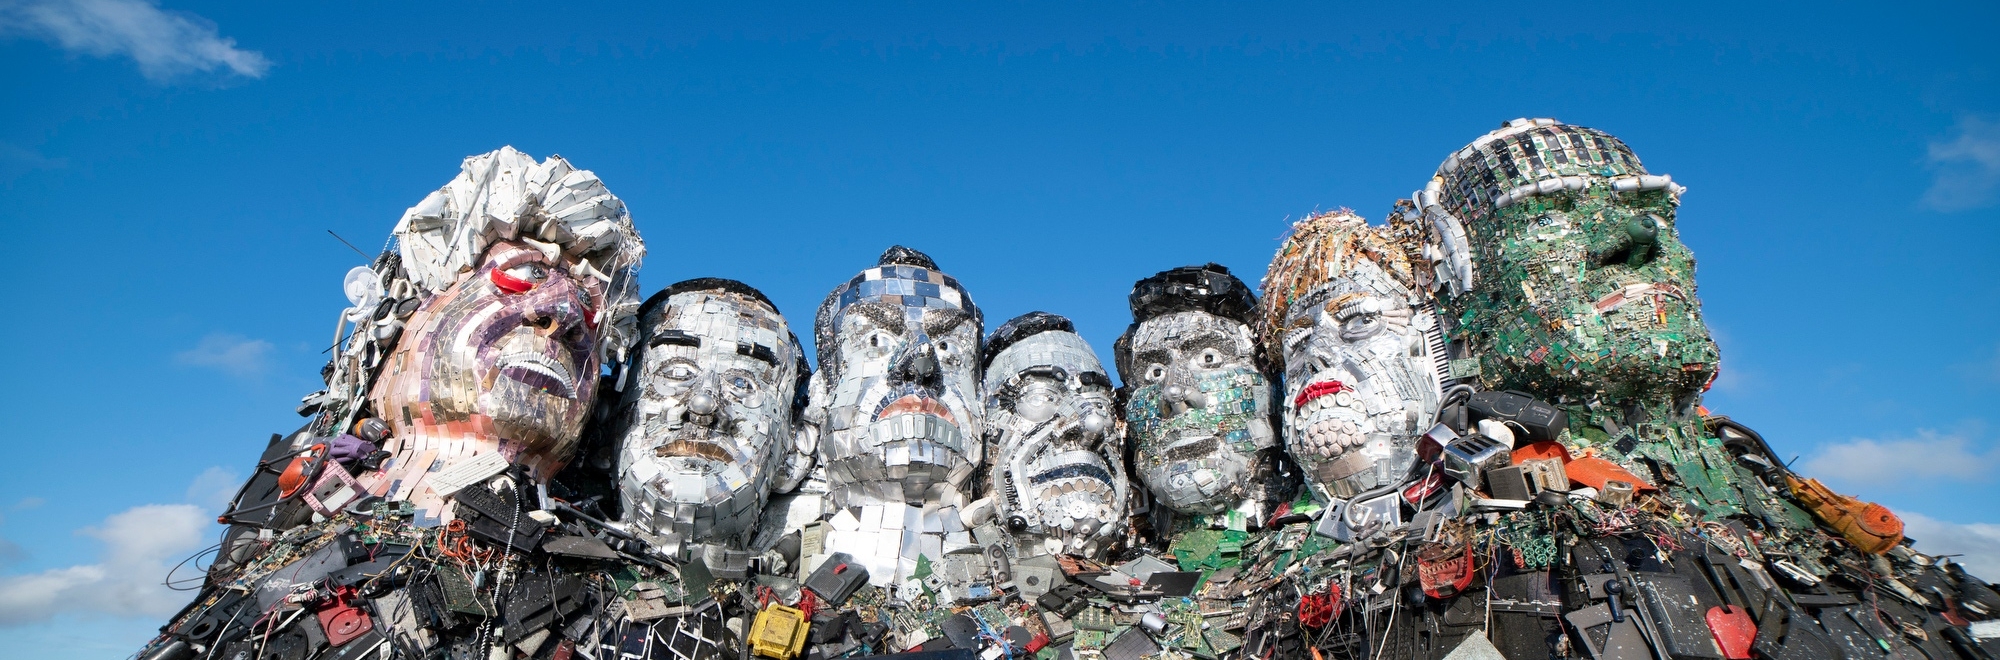 musicMagpie builds ‘Mount Recyclemore’, featuring G7 leaders made from e-waste